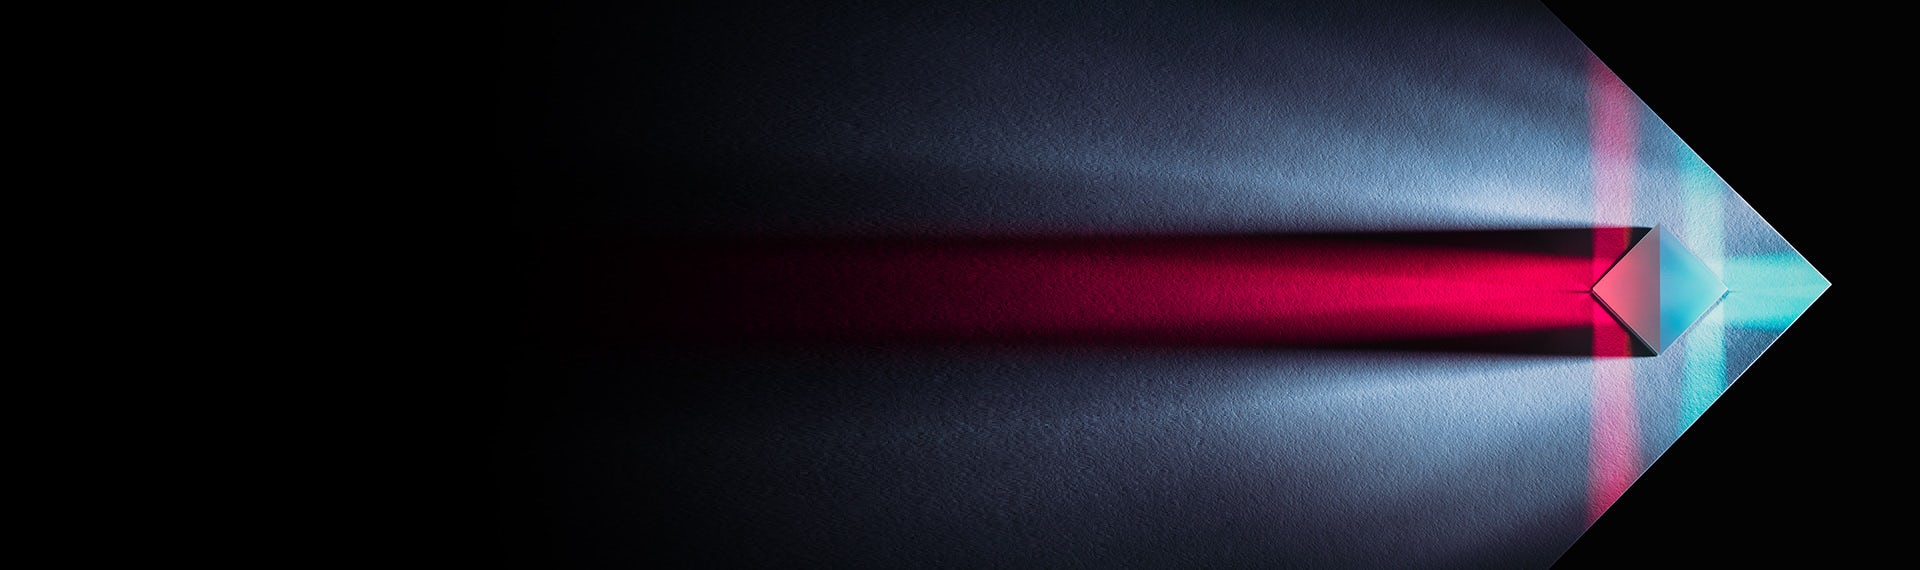 An image of a red and blue light coming out of a dark room.